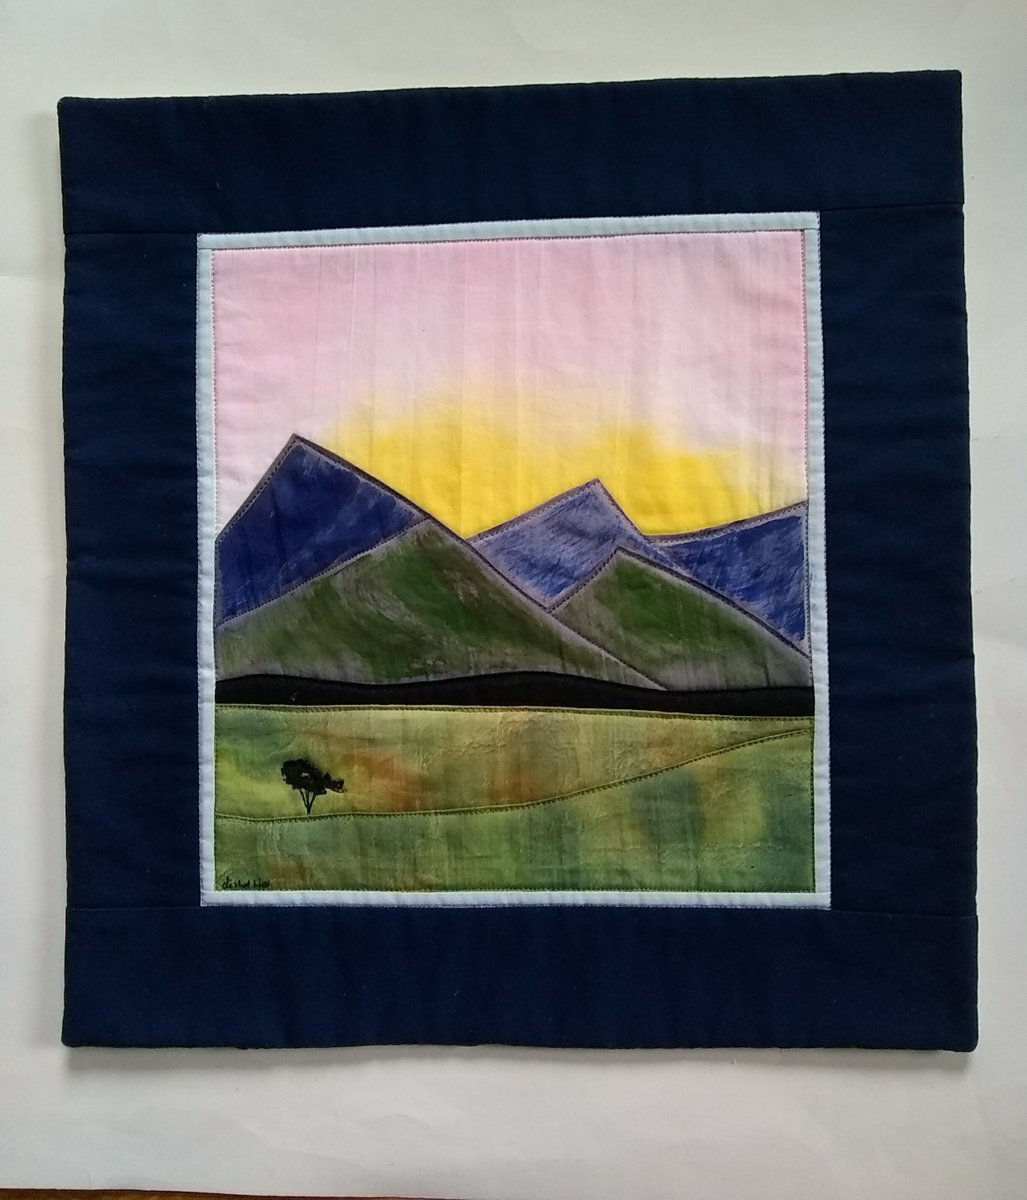 Excited to share the latest addition to my #etsy shop: Hand painted fabric, Blue Ridge Mountains Sunrise wall Art Quilt, wall hanging, landscape scene quilt etsy.me/3hEk619 #artquilt #hanpaintedfabric #cottonfabric #homedecor #modernwallquilt #landscapequilt #t